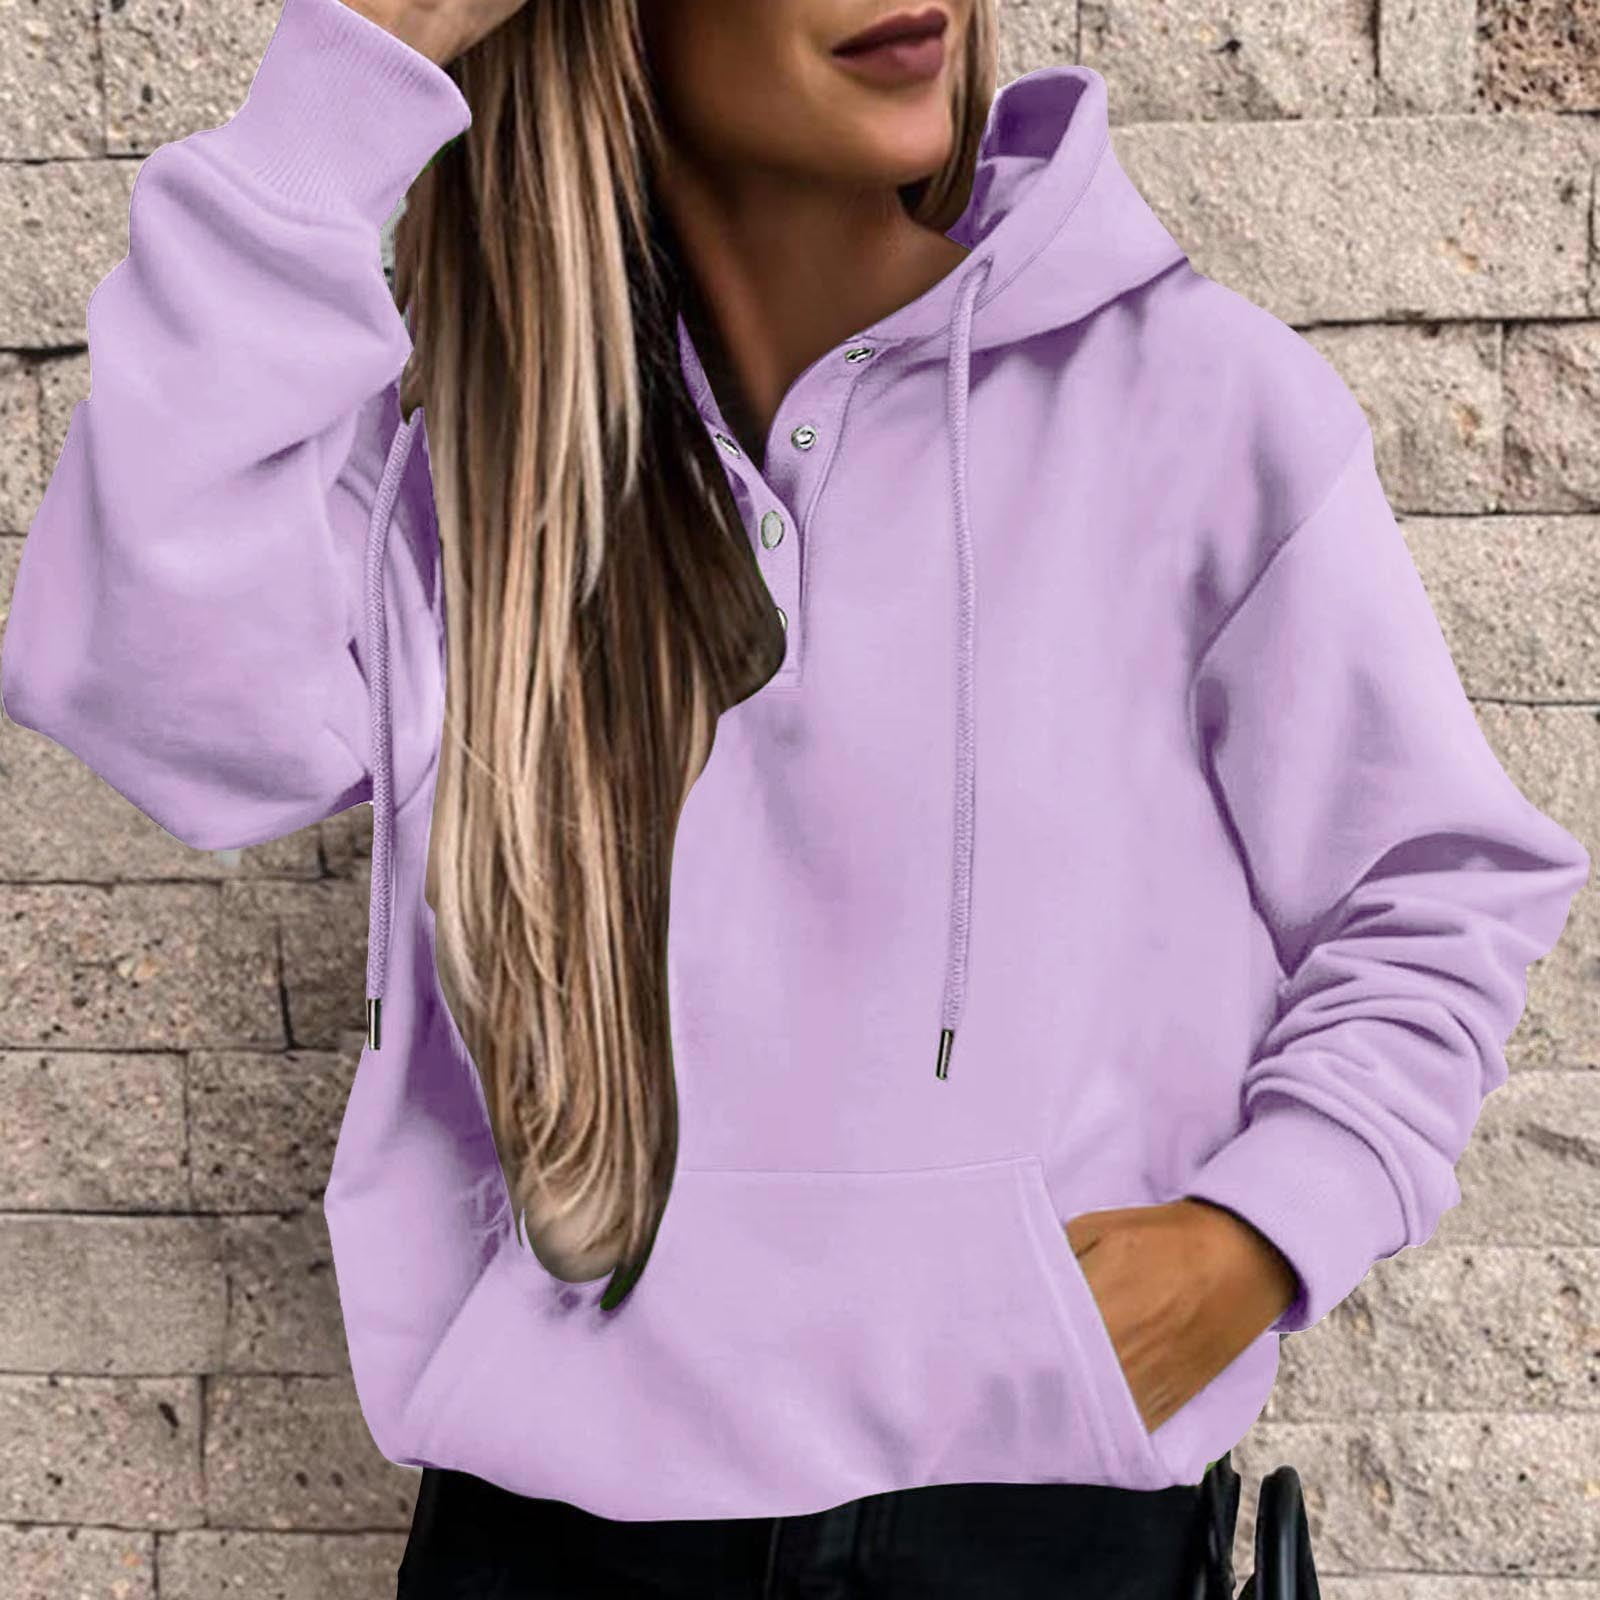  Rpvati Womens Sweatshirts V Neck Womens Hoodies Lightweight  Basics Womens Clothing Long Sleeve Ethnic Floral Womens Hoodies Pullover  Oversized Plus Size Clothes With Pocket Purple Xl : Ropa, Zapatos y Joyería